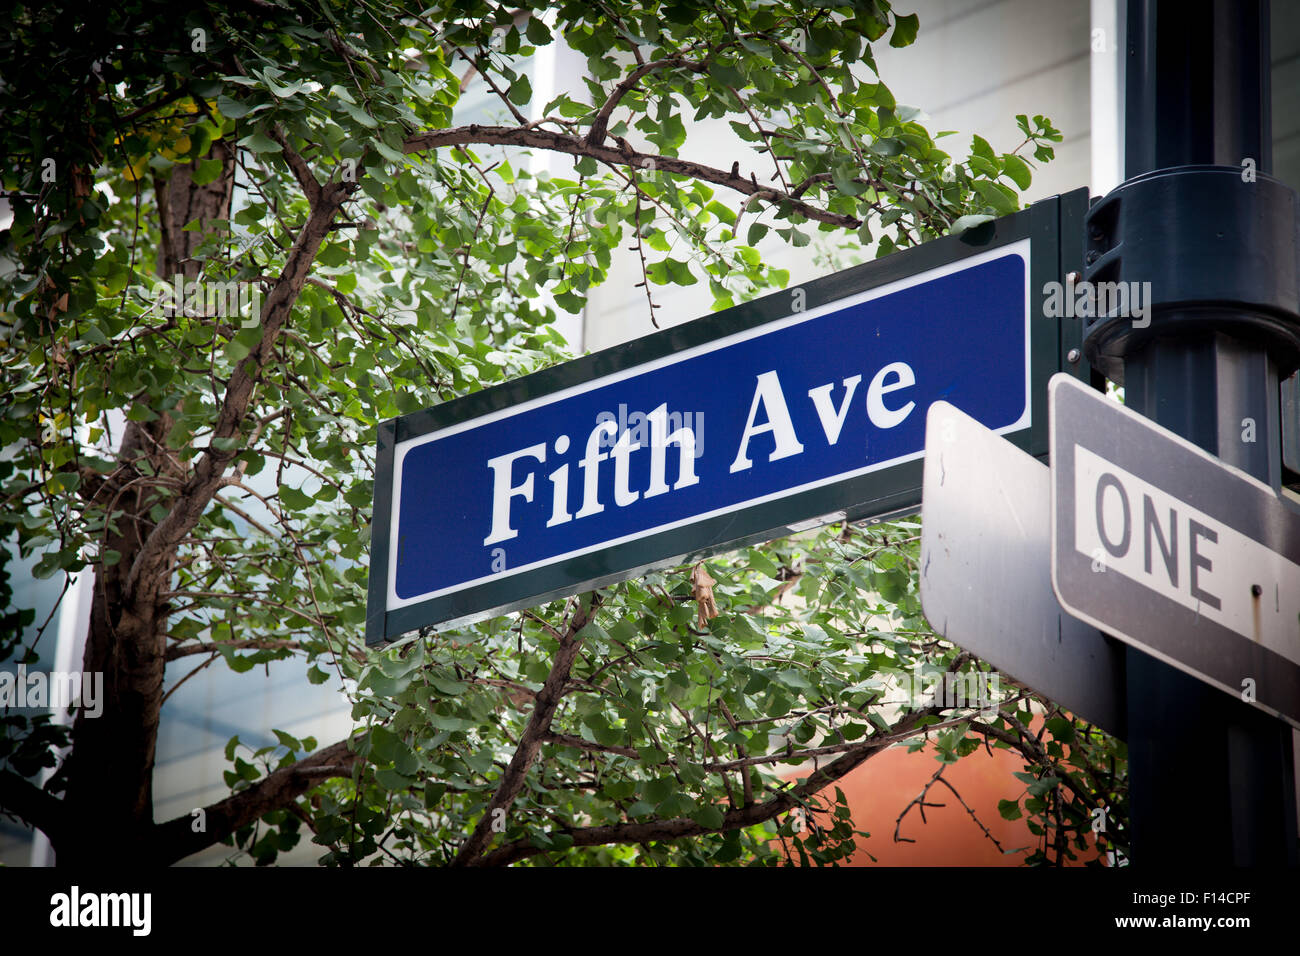 Fifth Avenue street sign Stock Photo